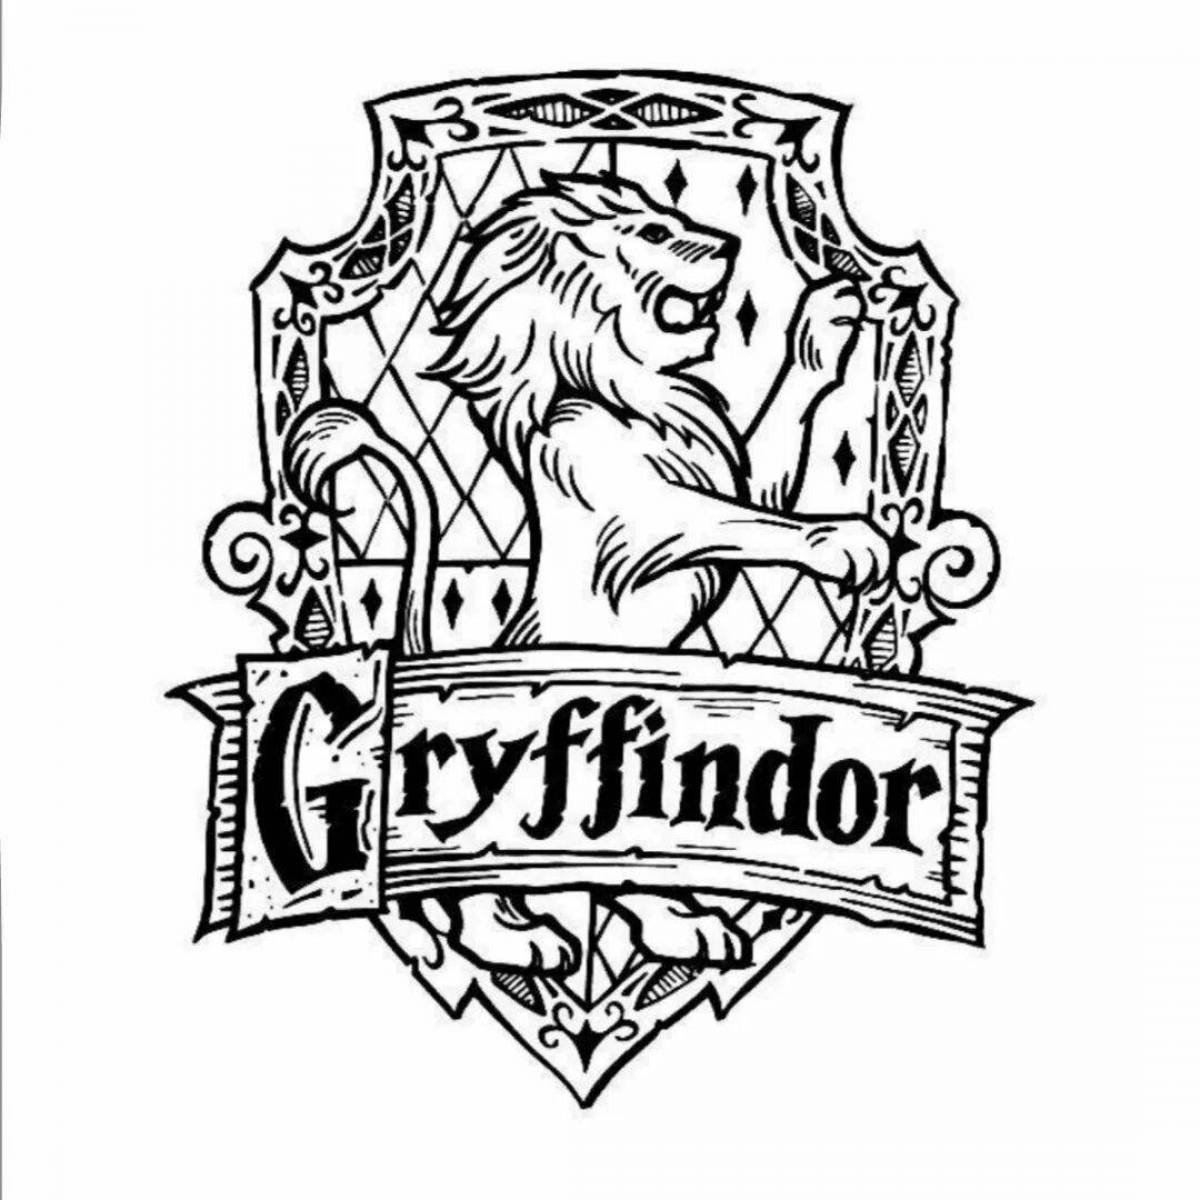 Hogwarts fine houses coloring book